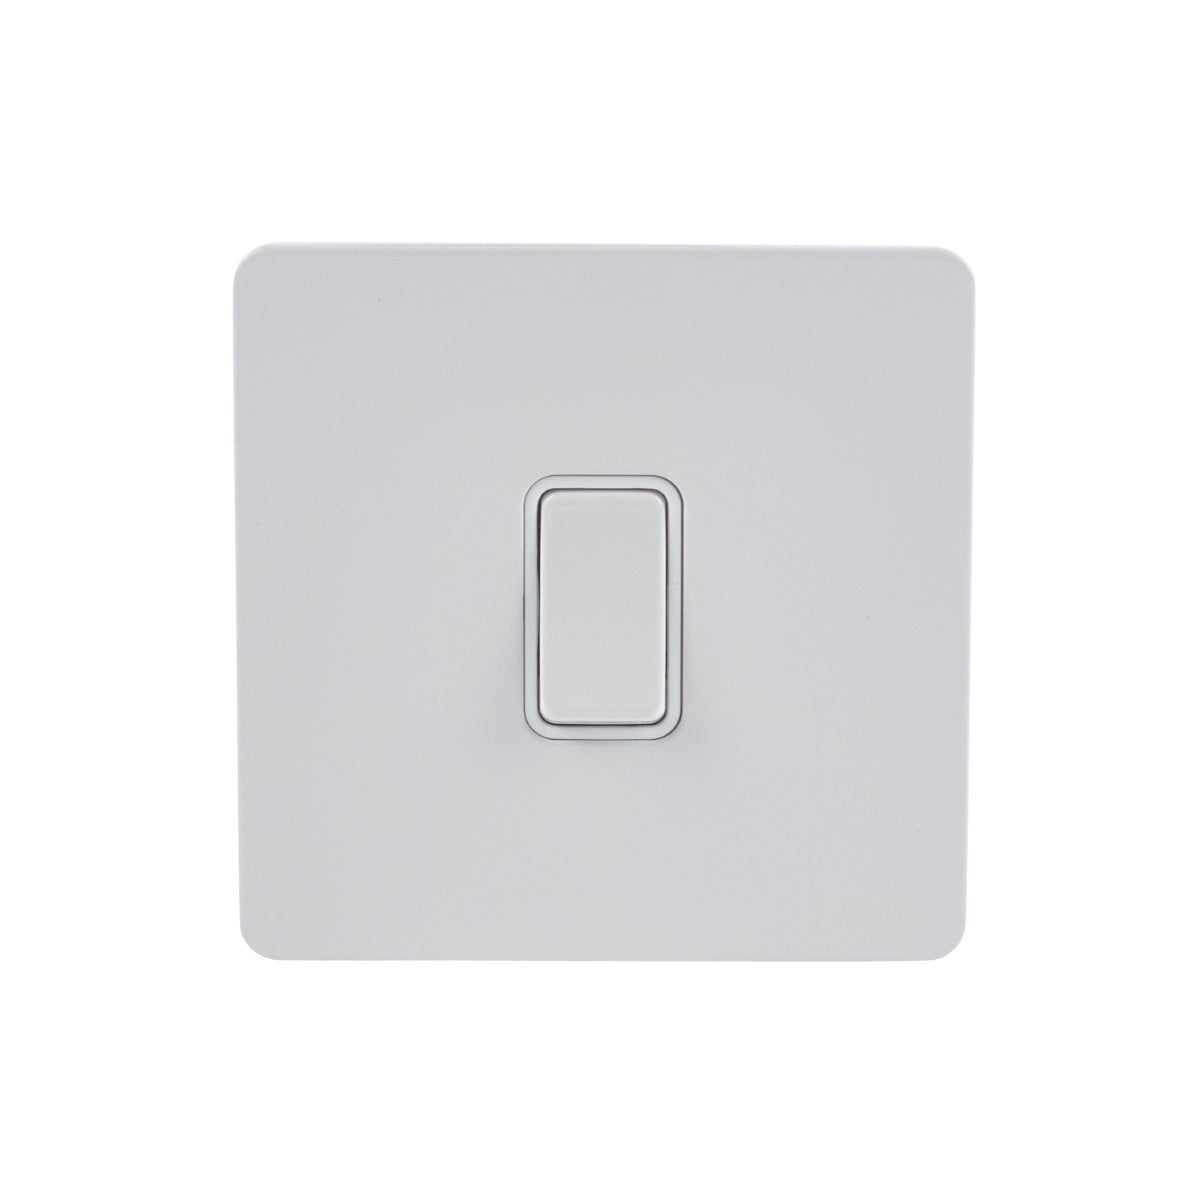 Ultimate Screwless flat plate - rocker plate switch - 1 gang - painted white